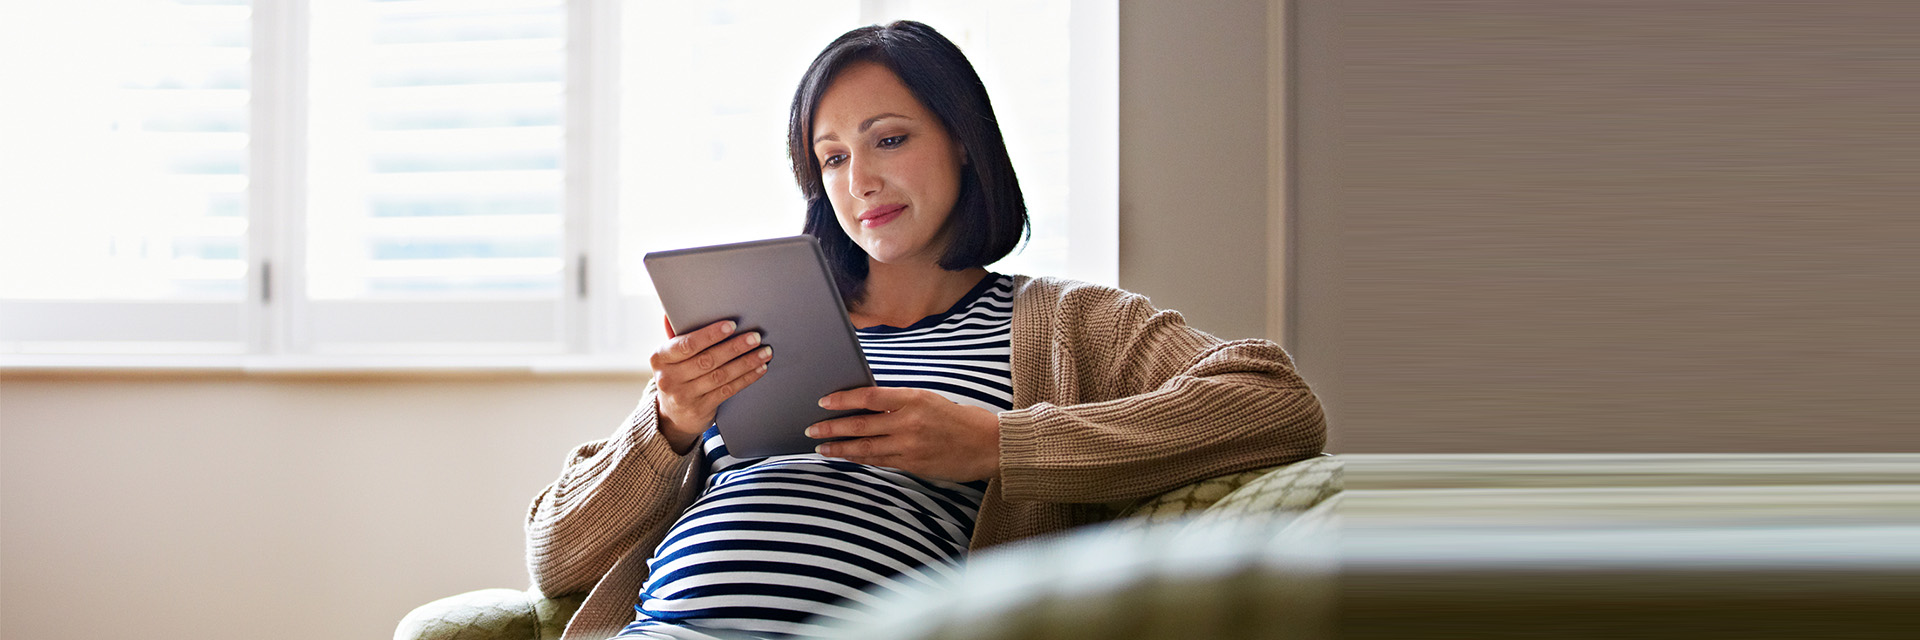 Pregnant Woman using tablet